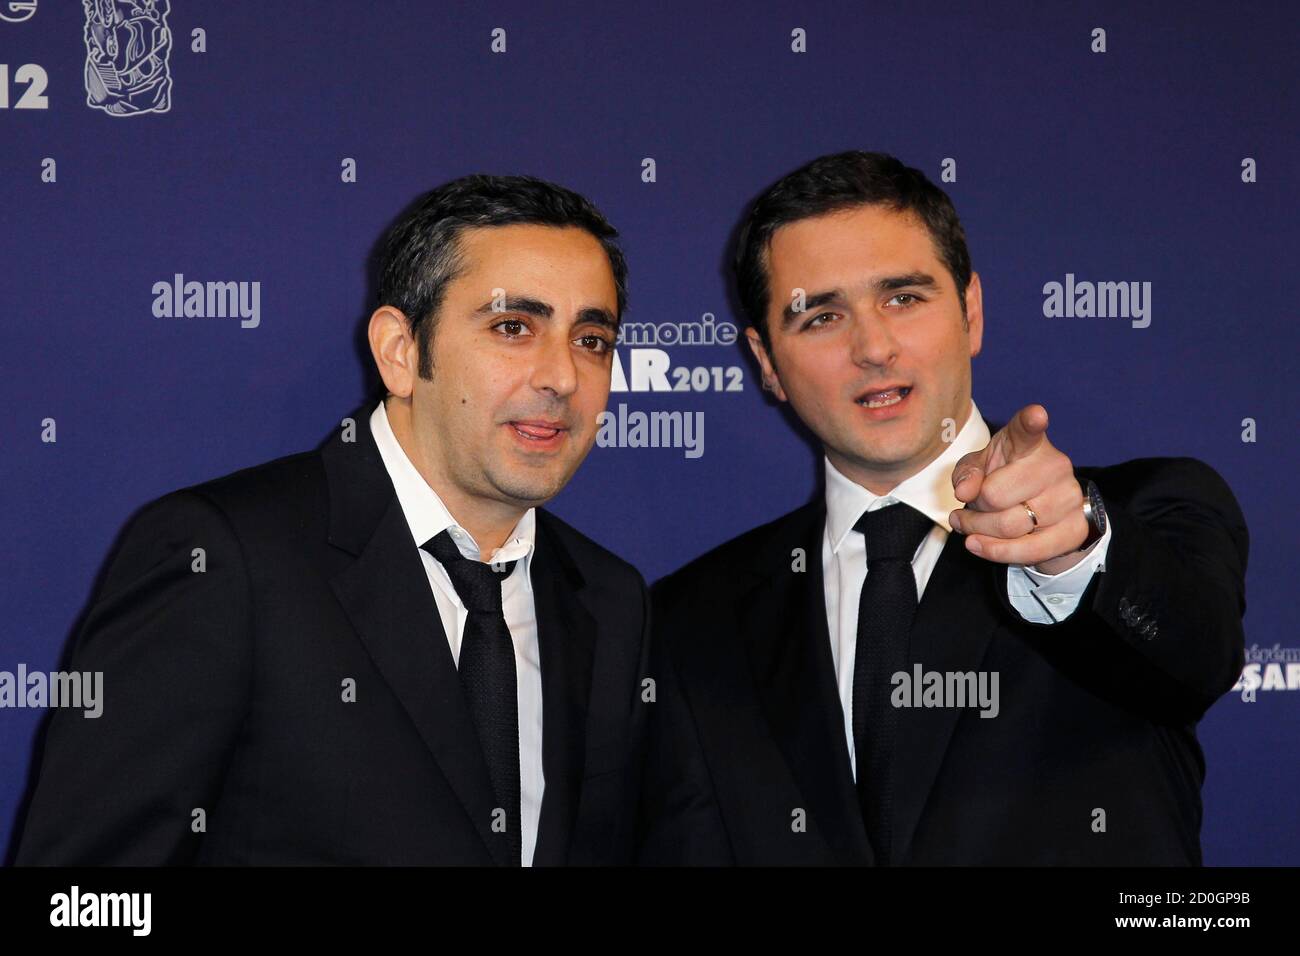 French directors Eric Toledano (L) and Olivier Nakache pose as they arrive at the 37th Cesar Awards in Paris February 24, 2012. REUTERS/Gonzalo Fuentes (FRANCE - Tags: ENTERTAINMENT) Stock Photo